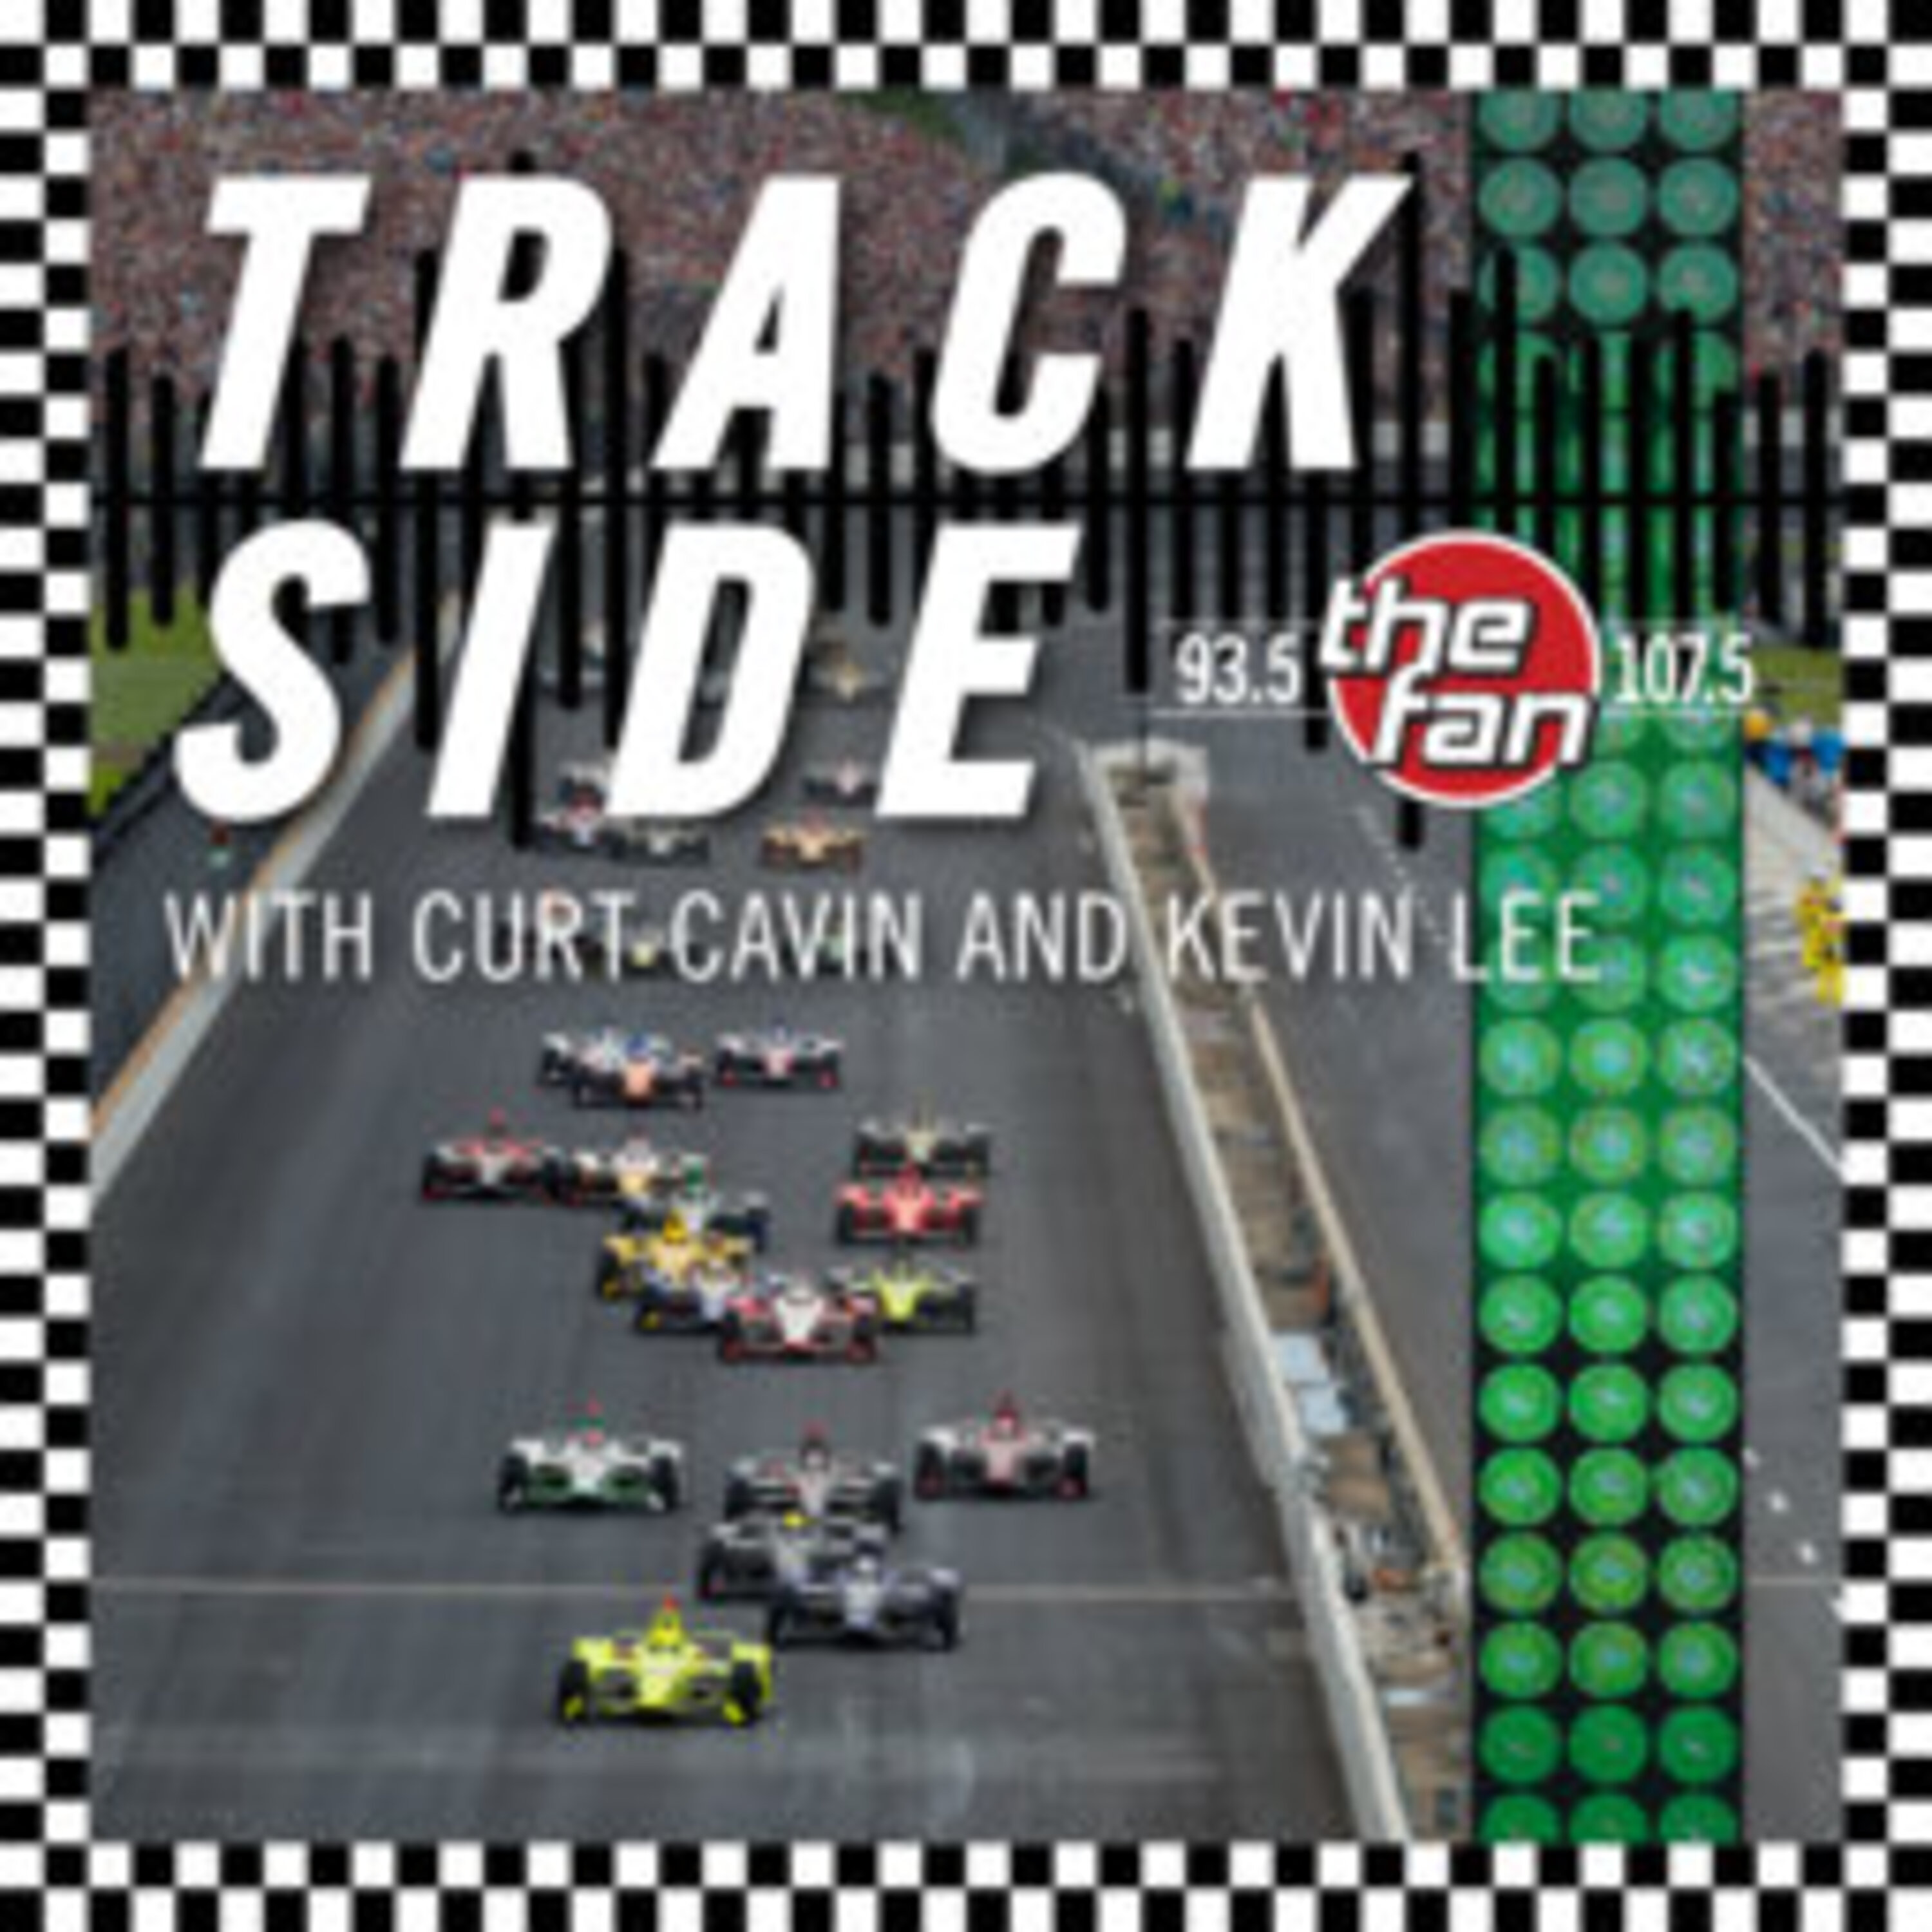 Curt and Kevin talk about David Malukas' injury, possible Indy 500 entries, Kyle Larson, and more!